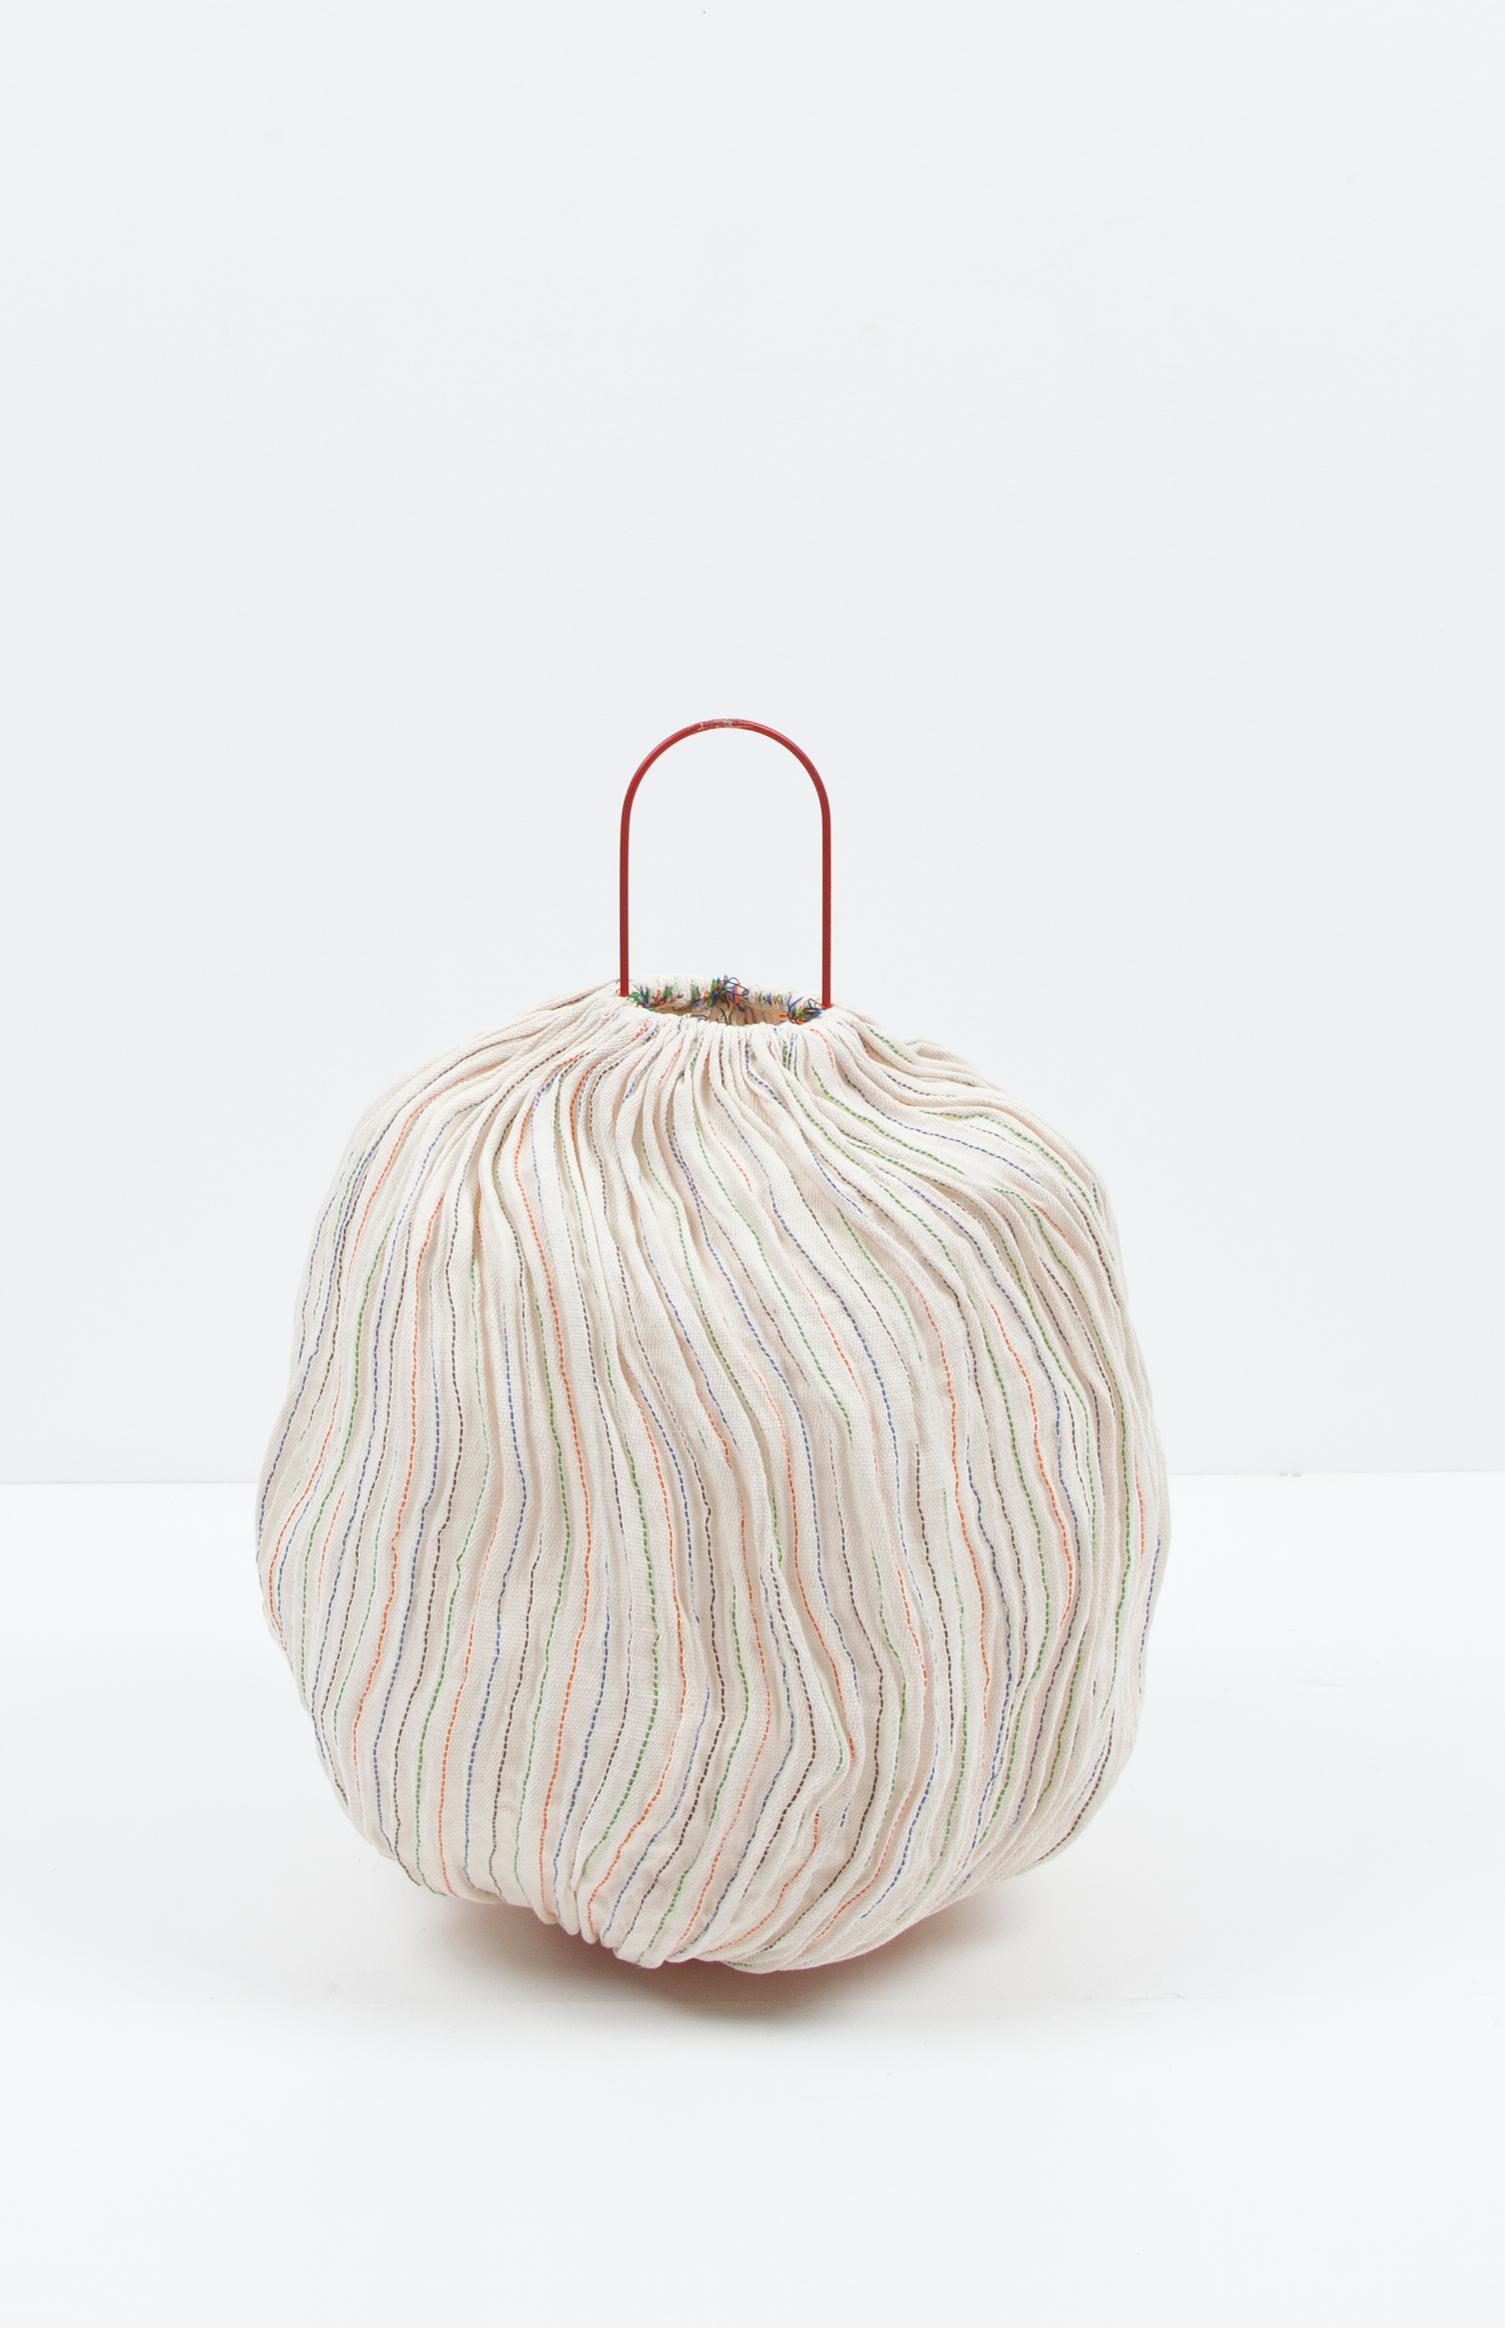 Hand-Woven Nebule lamp with a metal base - medium size For Sale